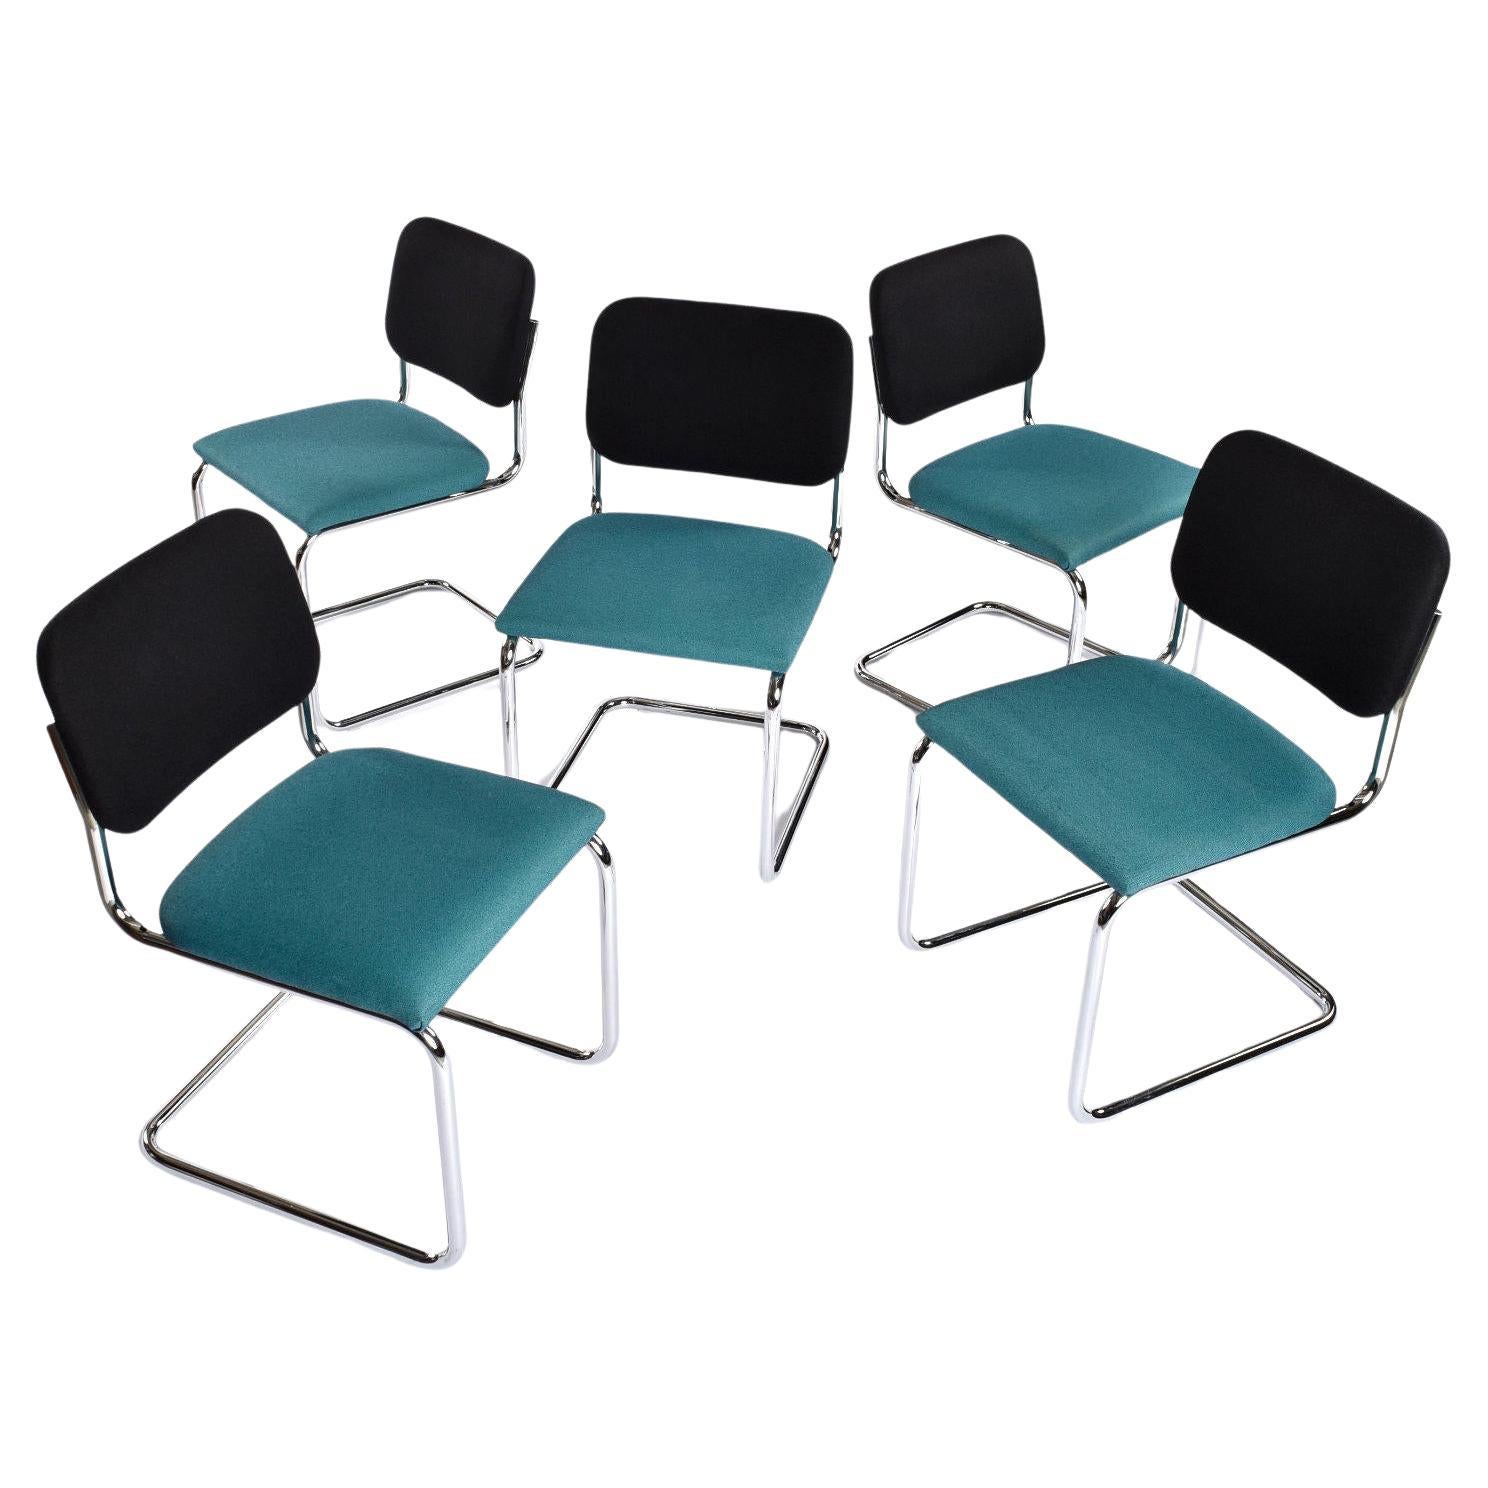 Glorious set of 5 Marcel Breuer for Knoll Cesca chairs. The authentic chairs have the Knoll Studios name and Marcel Breuer’s signature embossed on the metal frames. This particular set dates to 2019 and looks to have been scarcely used. The upper